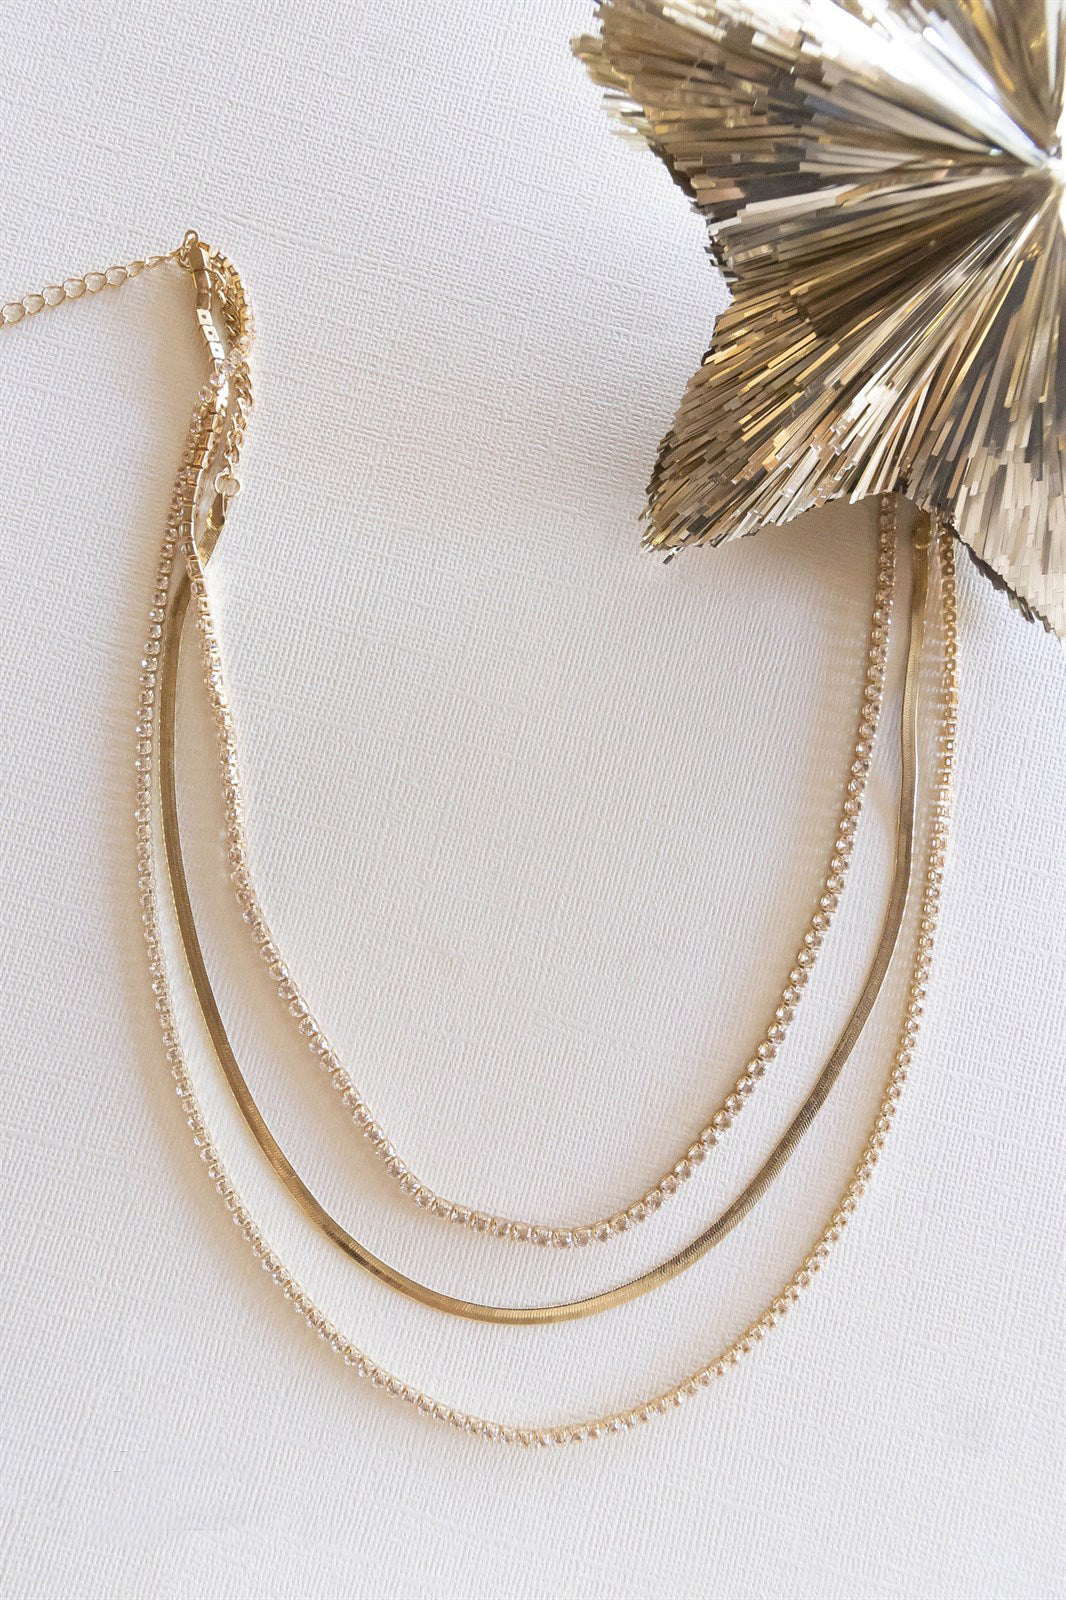 Load image into Gallery viewer, Amari Short Gold Layering Necklace | Delicate Chain Necklaces | Minimalist Gold Chain Necklace
